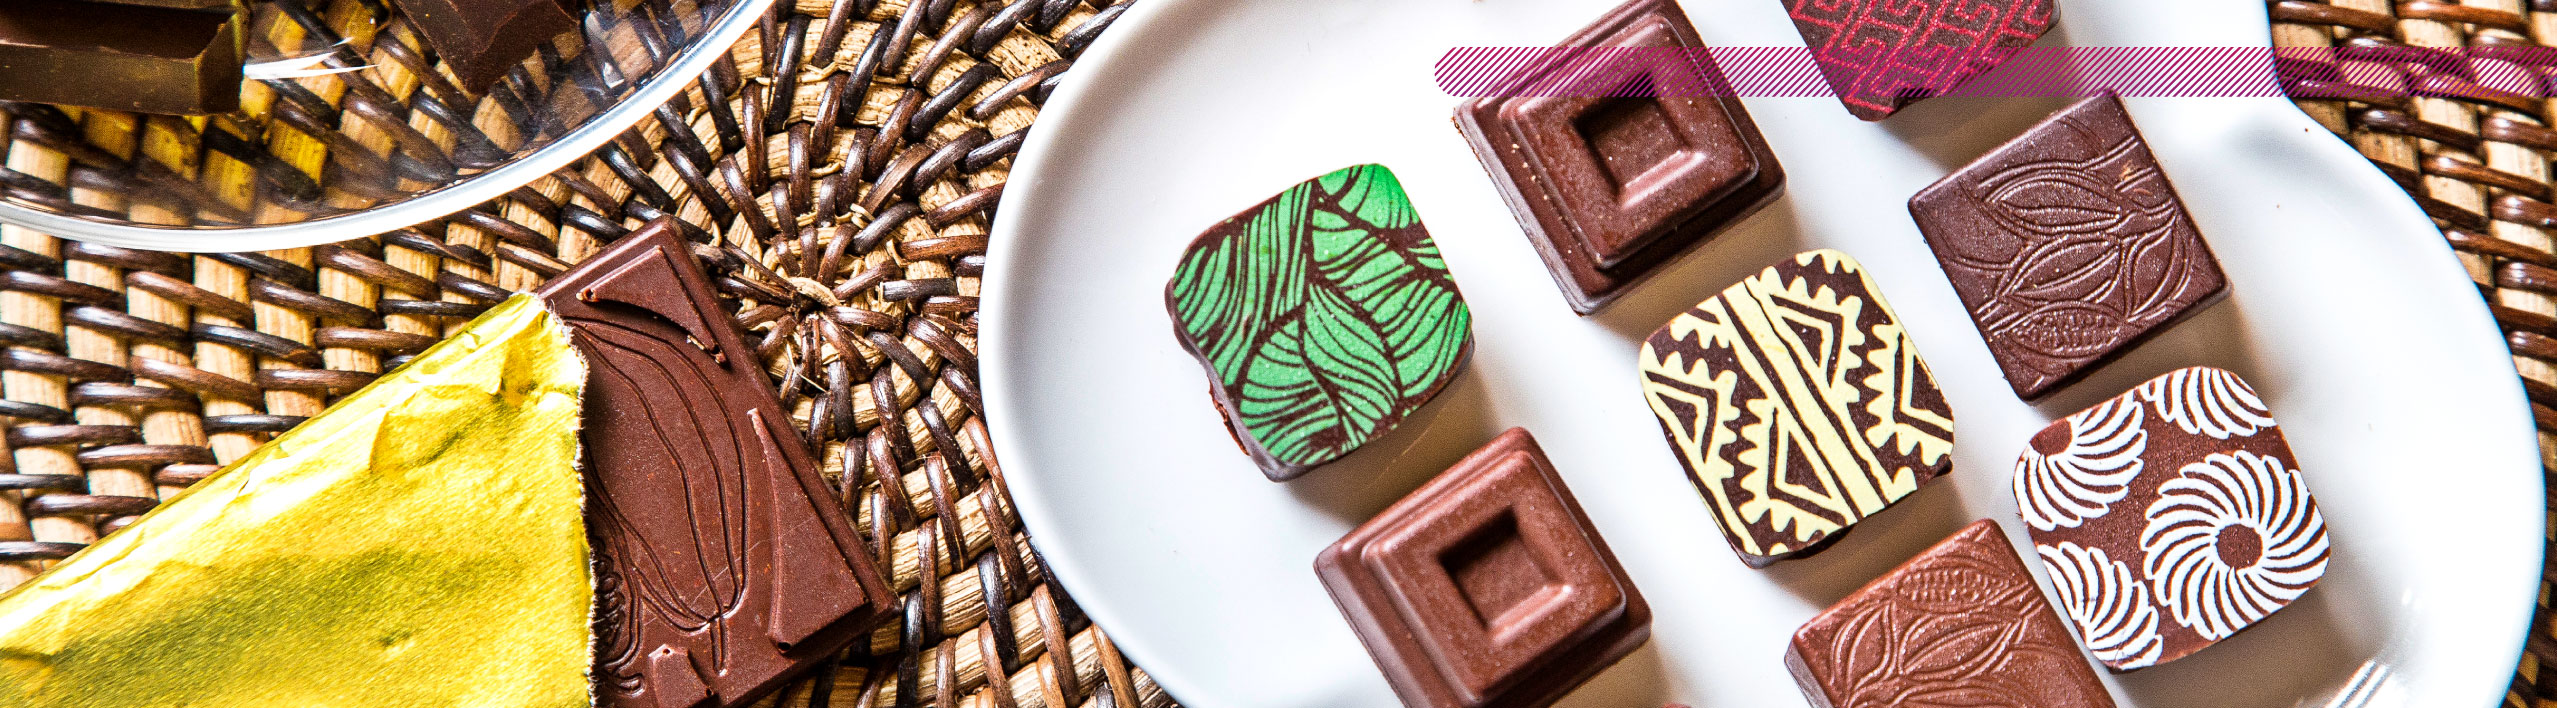 Costa Rican chocolate bars and truffles innovation and well-being